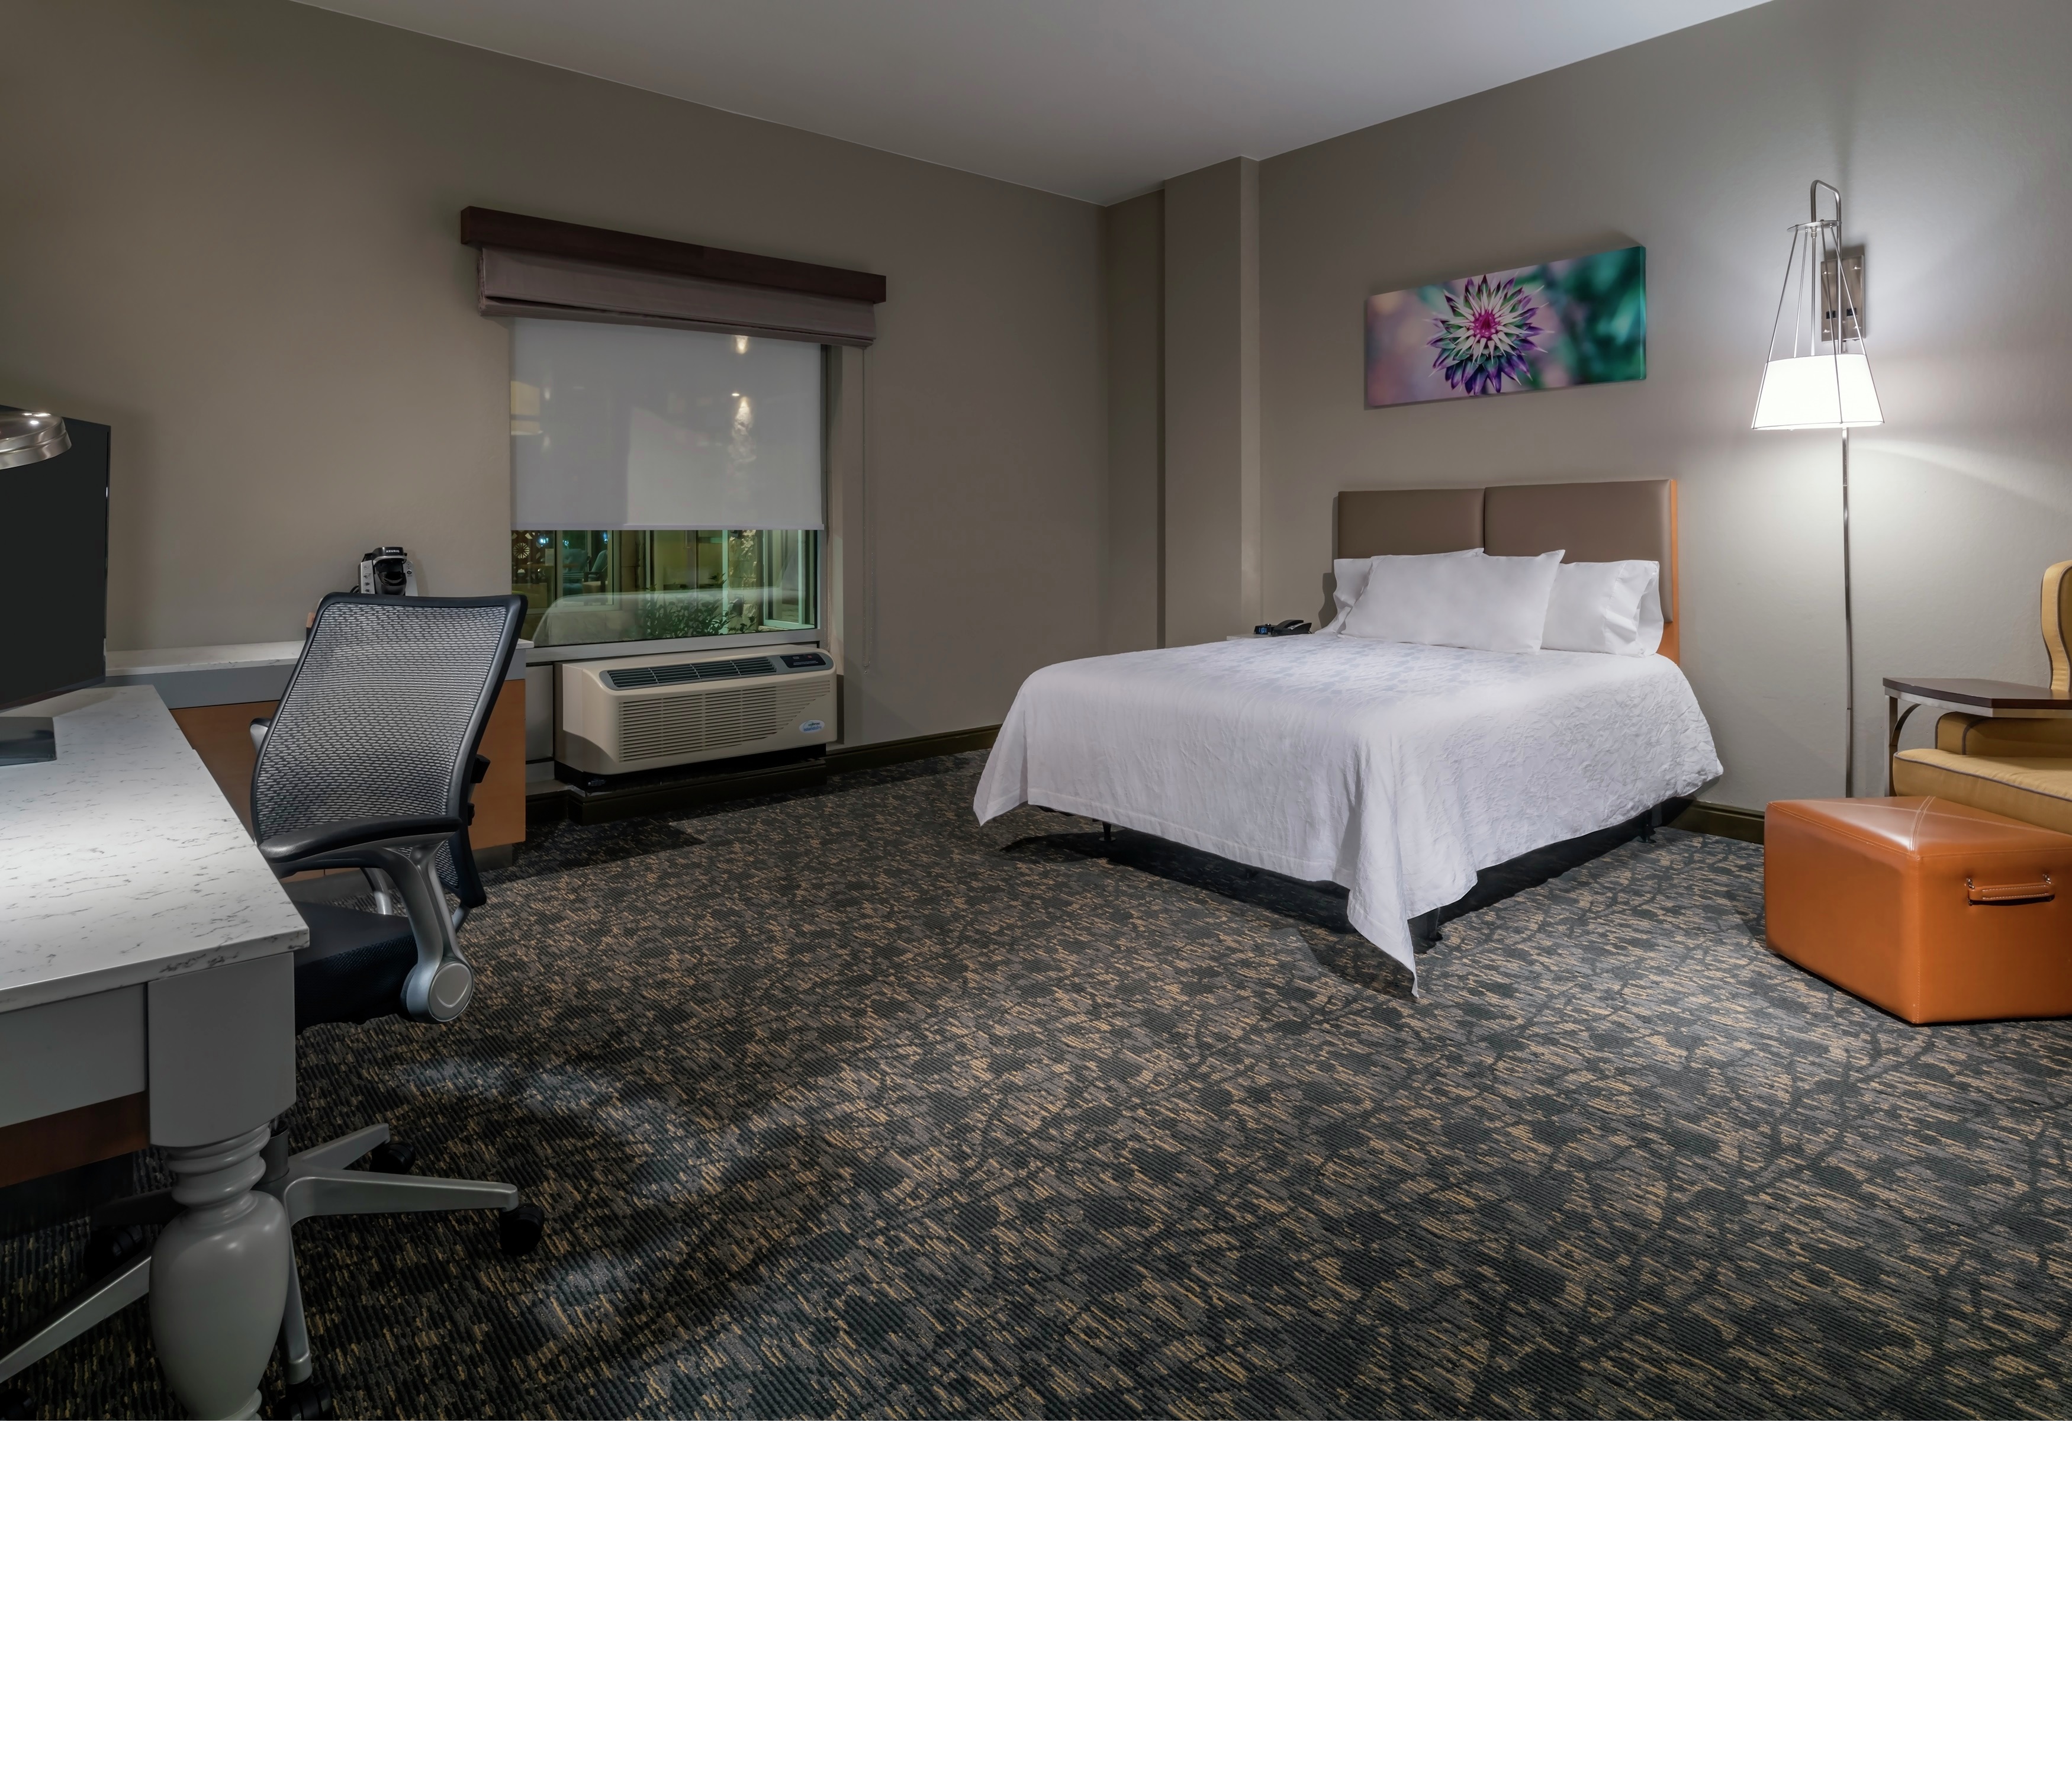 Accessible Queen-Sized Guestroom with Work Desk, Lounge Area, and Room Technology